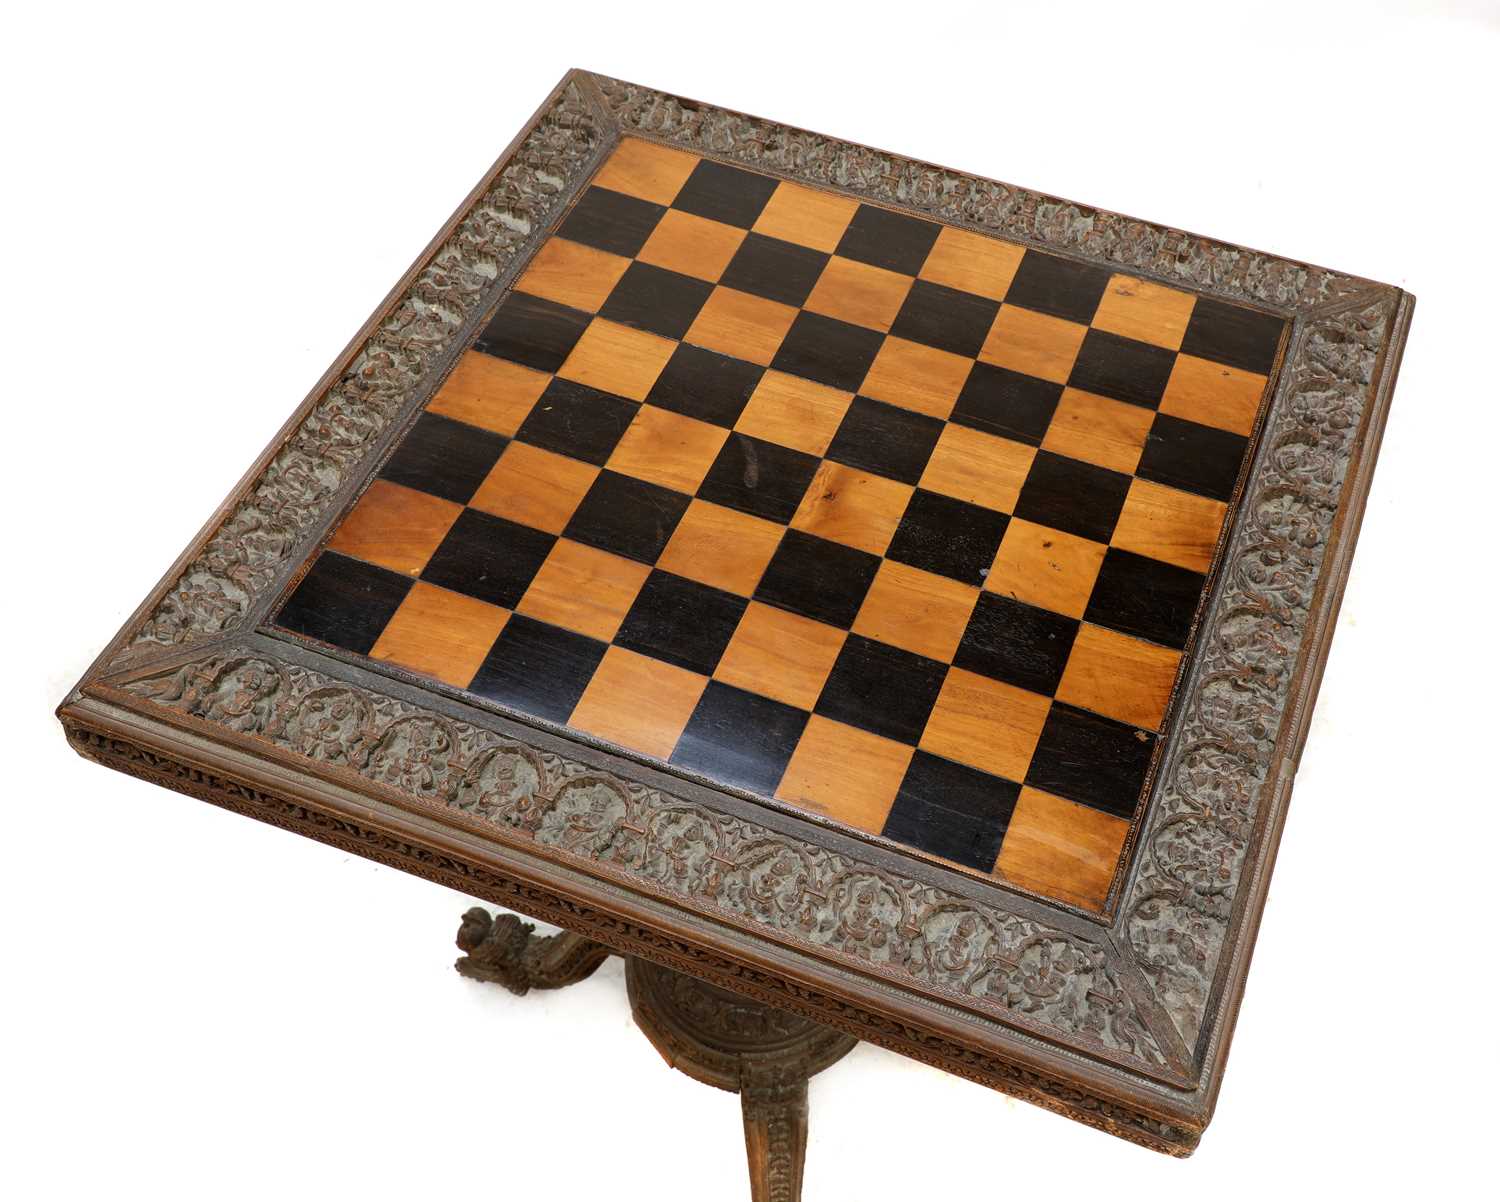 An Indian carved sandalwood chess or games table, - Image 2 of 5